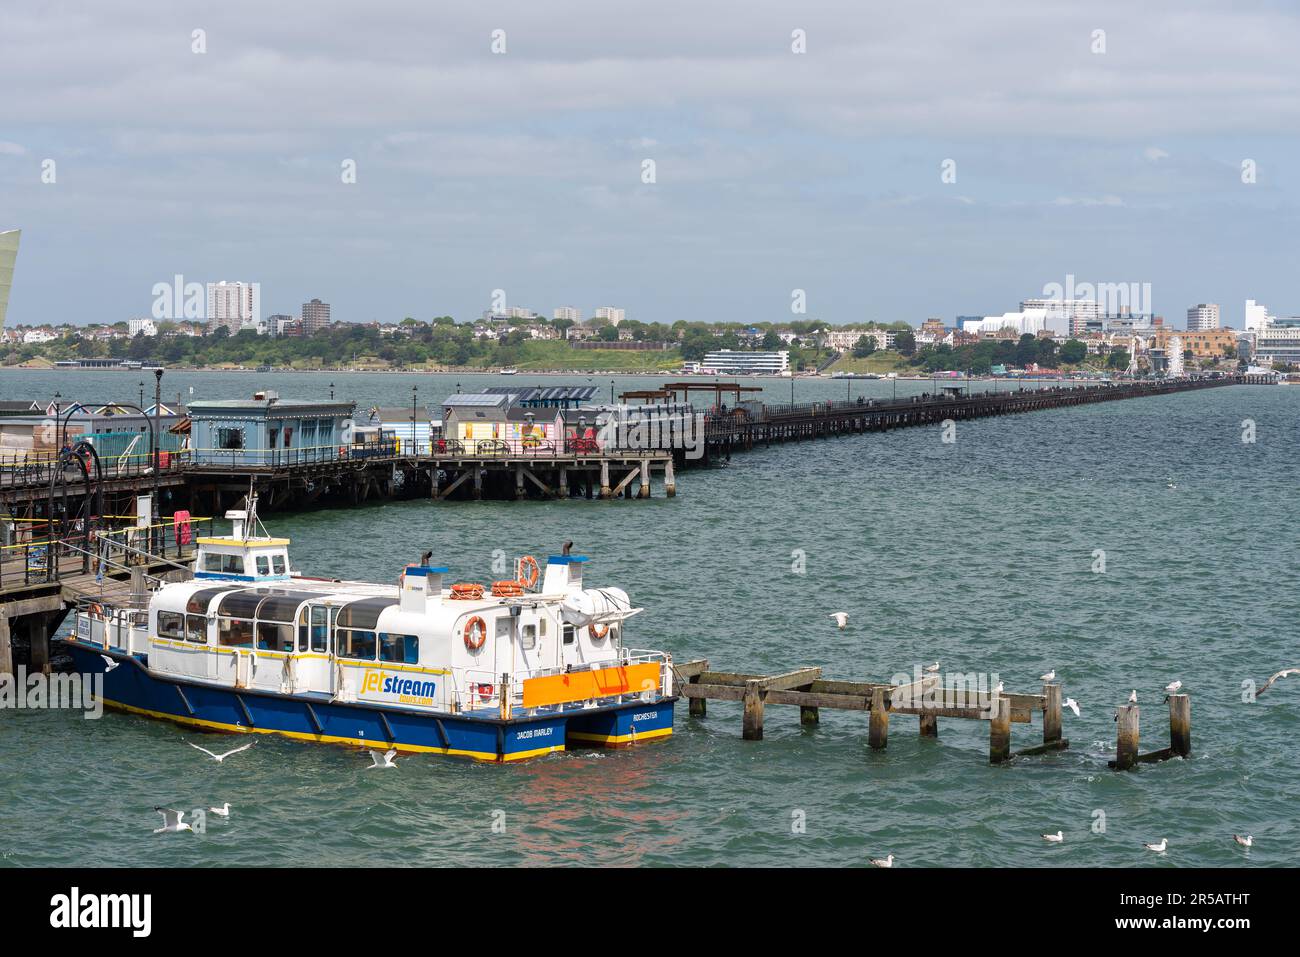 Southend Pier, Southend on Sea, Essex, UK. 2nd Jun, 2023. Southend Pier has been awarded the National Piers Society ‘Pier of the Year’ award for 2023, with today being its official presentation day. Pleasure tour boat Stock Photo